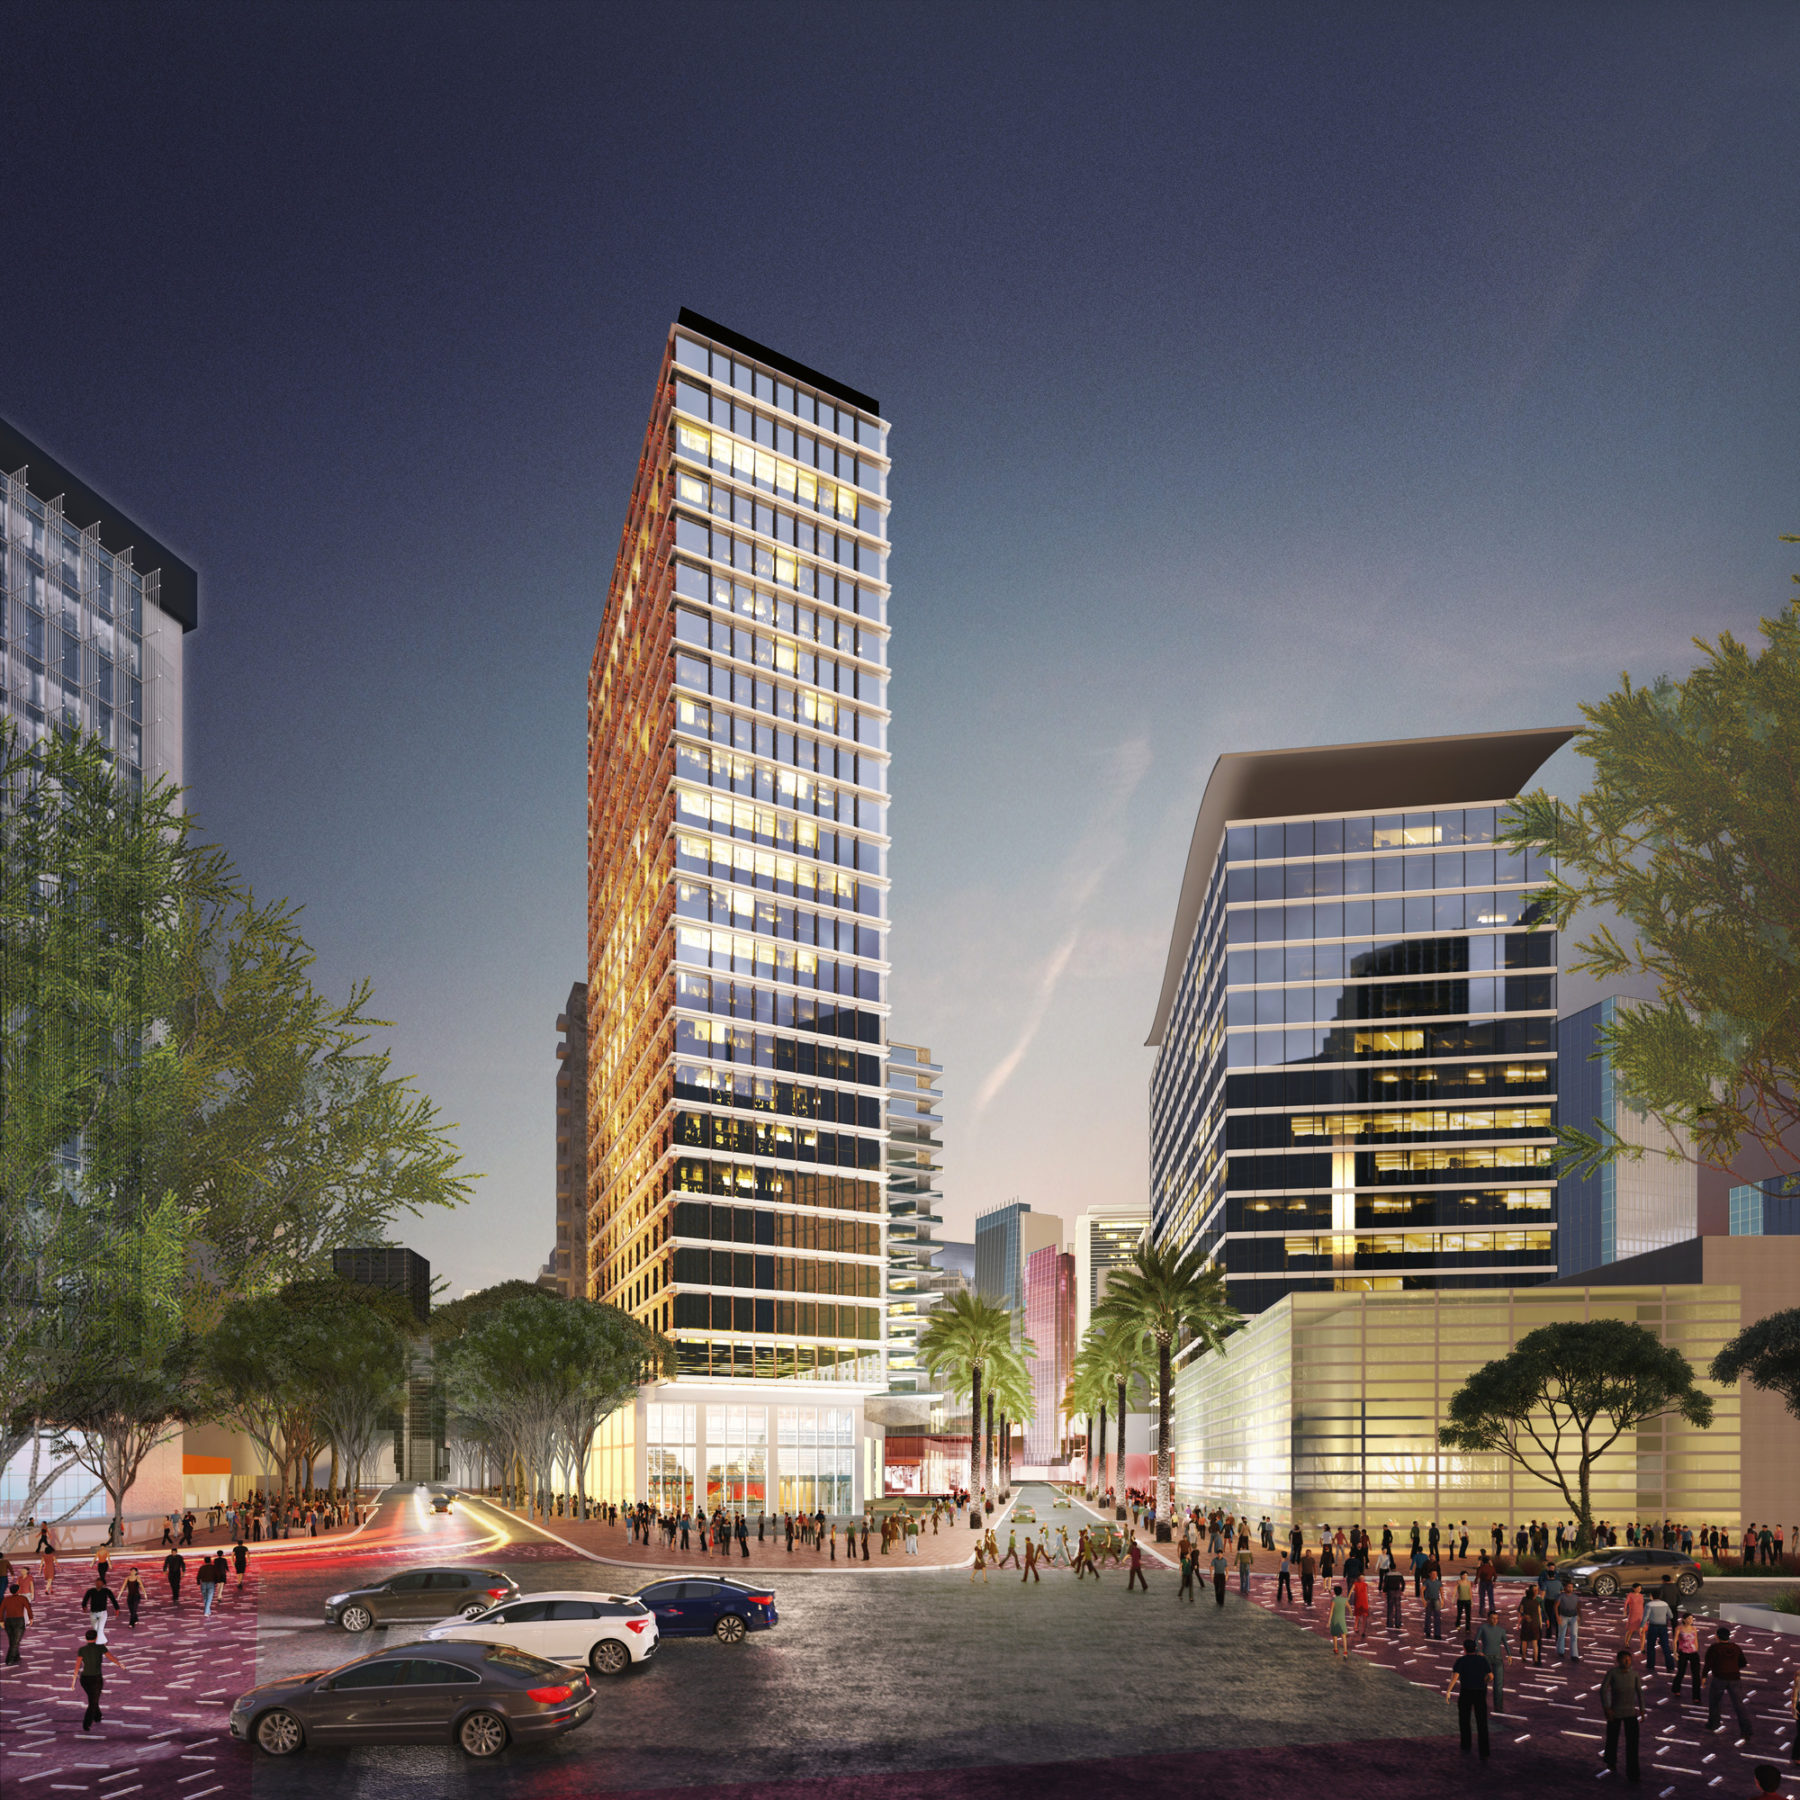 Render of a towering new building surrounded by evening foot traffic